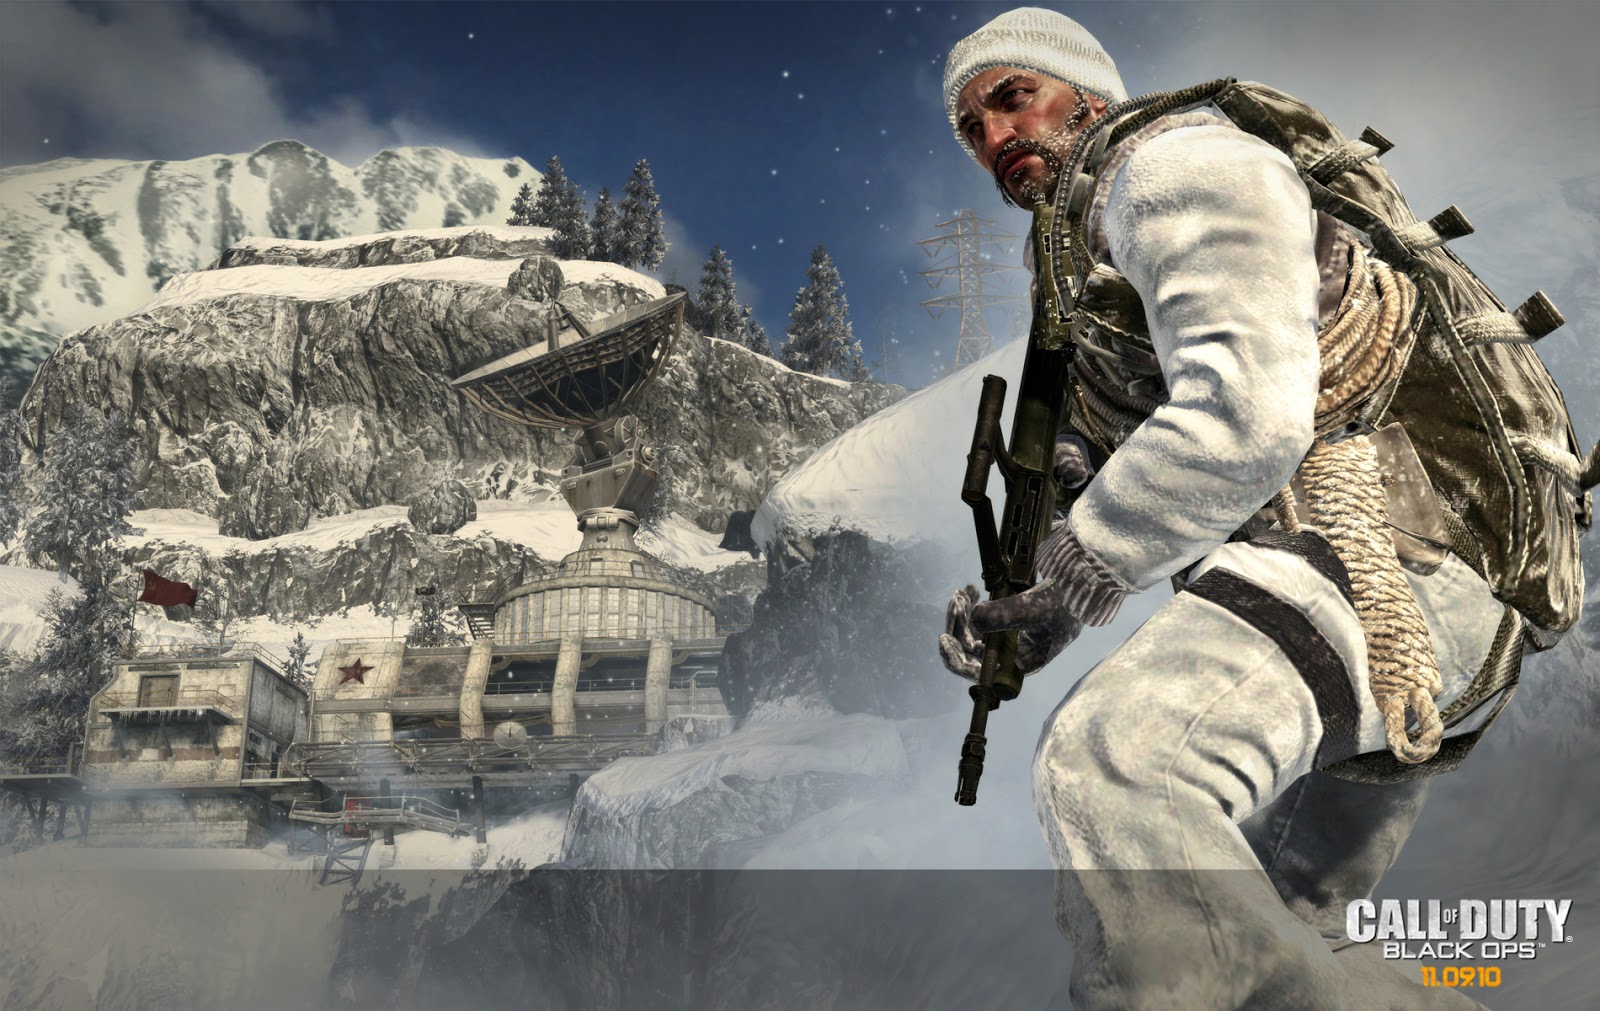 Hd Wallpapers Mania Call Of Duty Balack Ops Hd Wallpapers